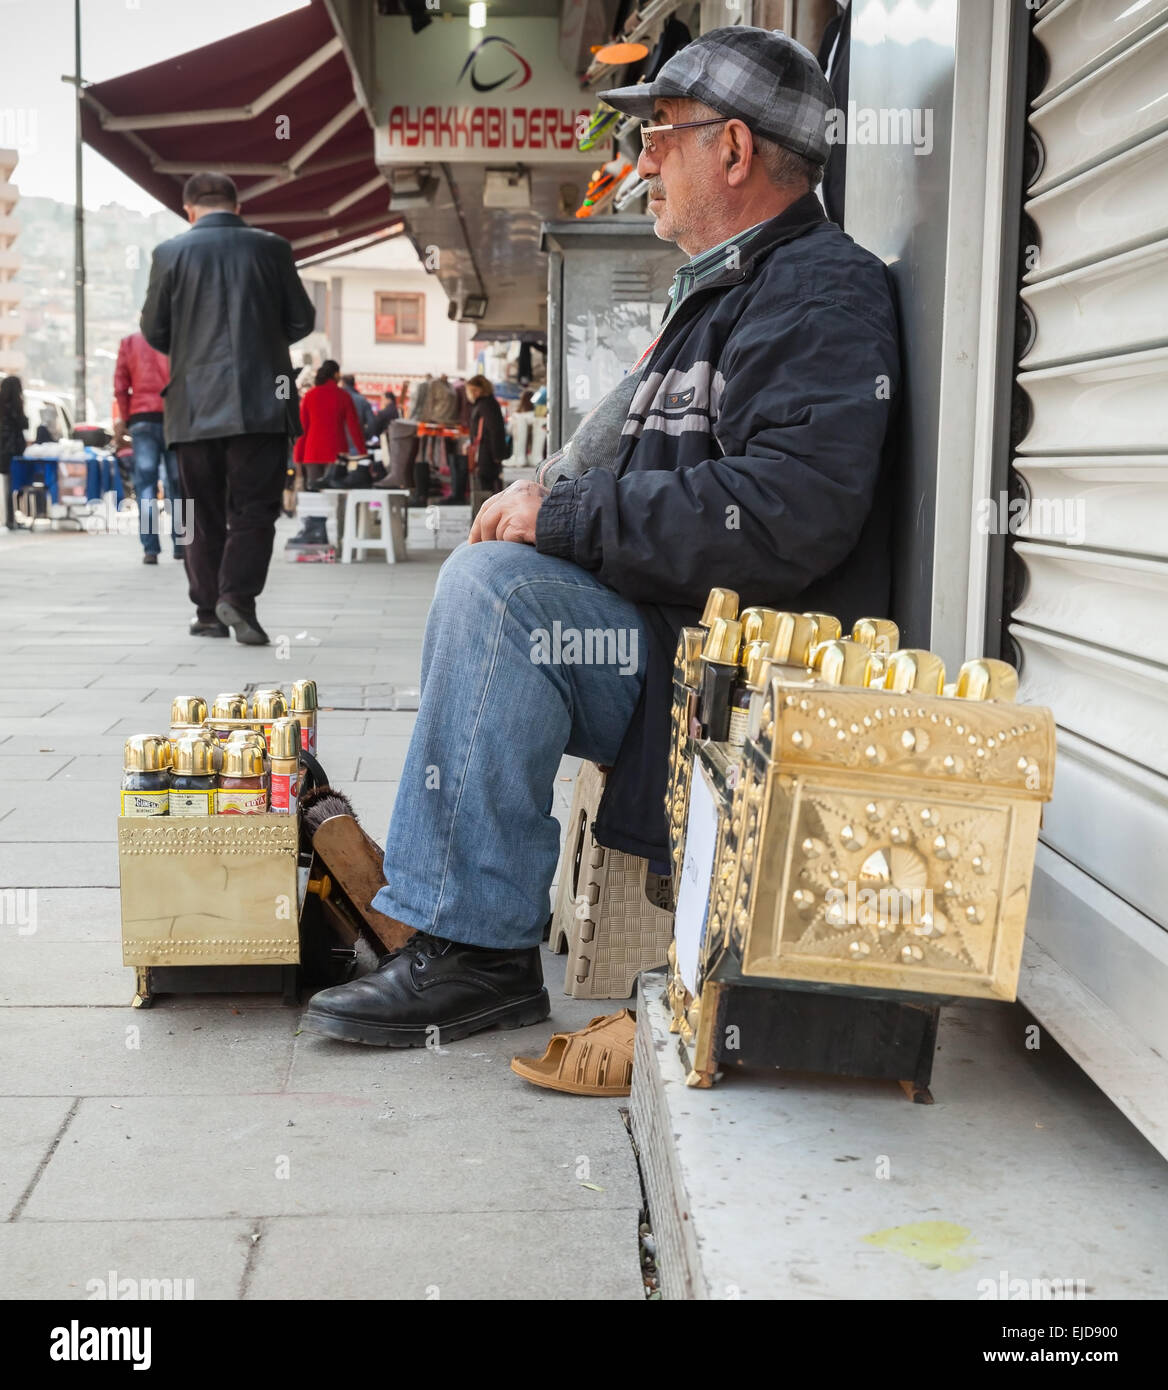 Izmir, Turkey - February 7, 2015: Senior shoeshine man sitting on his workplace and waiting for clients Stock Photo